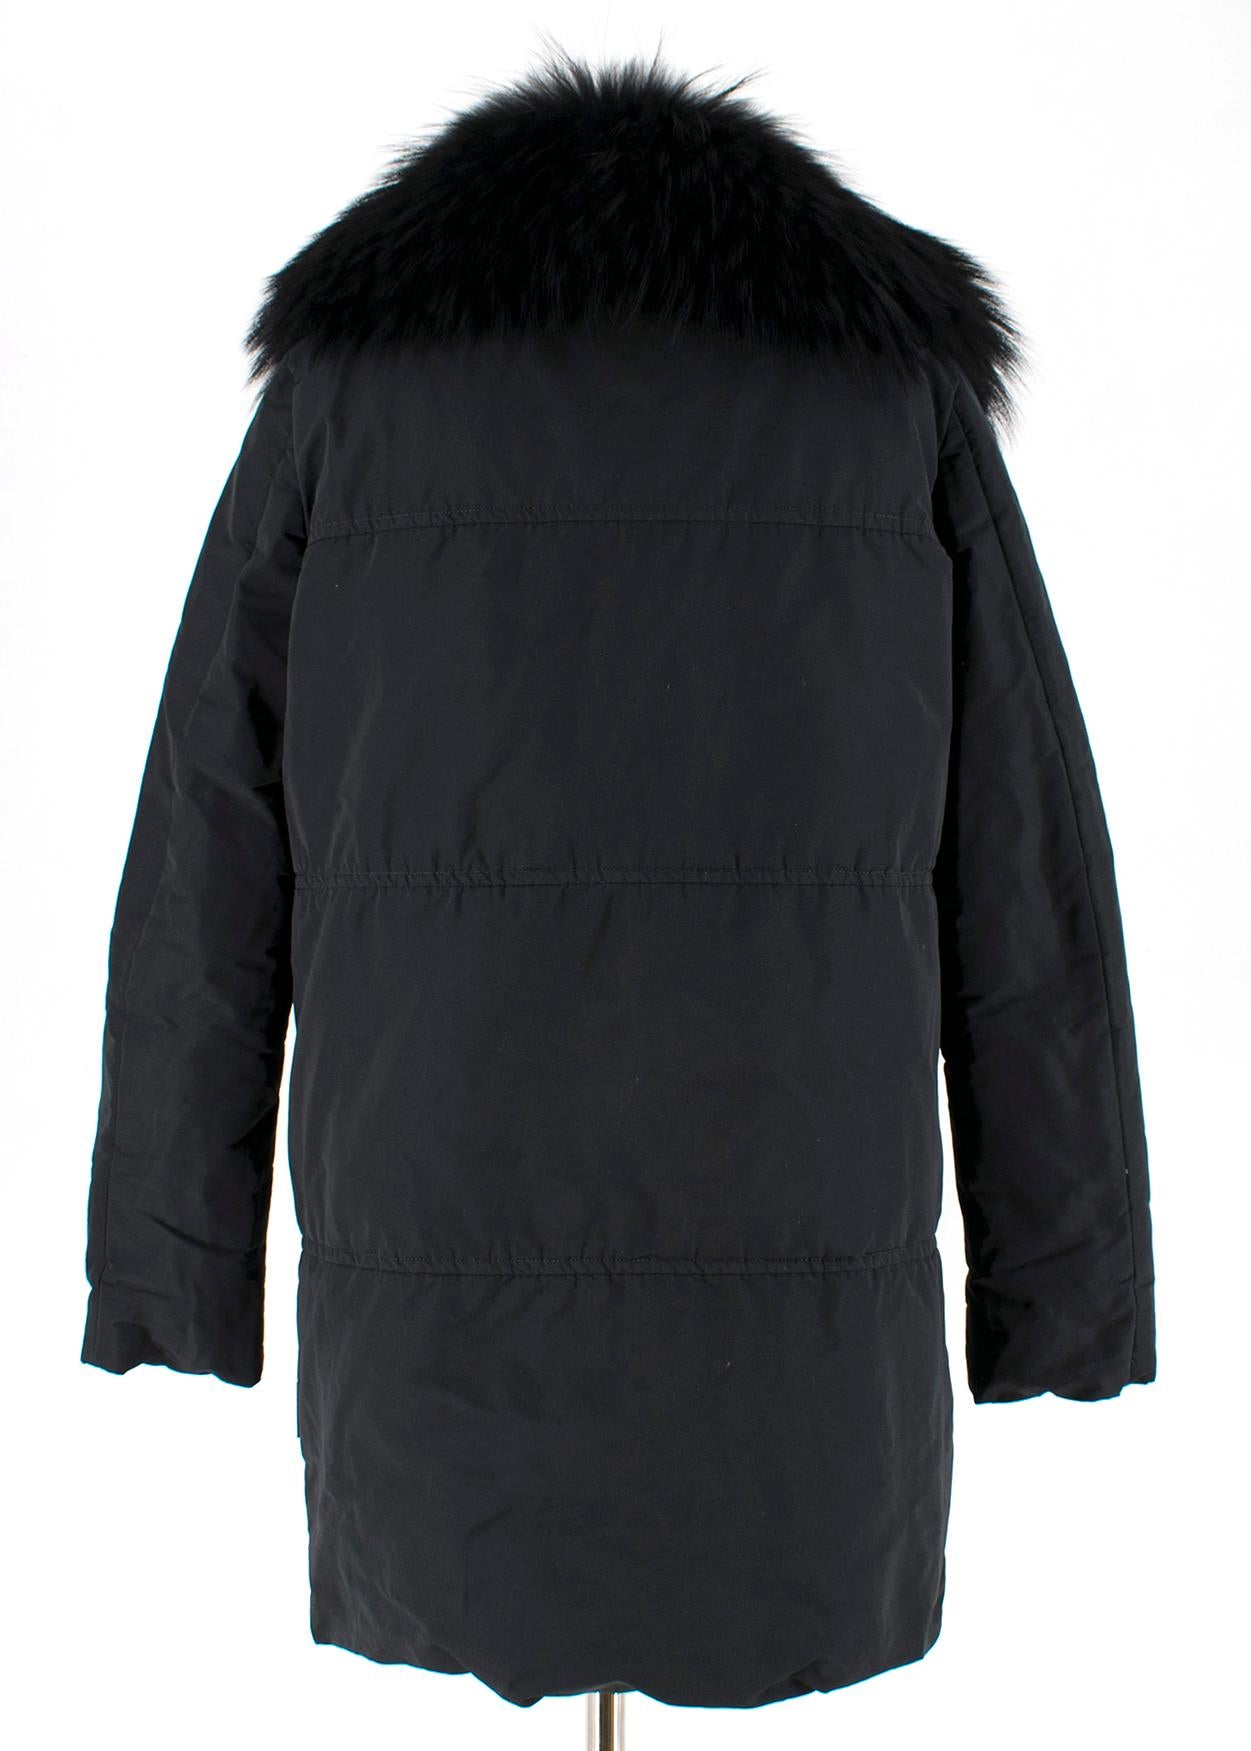 Moncler Black Down Coat with Fur Collar - Size M  For Sale 1